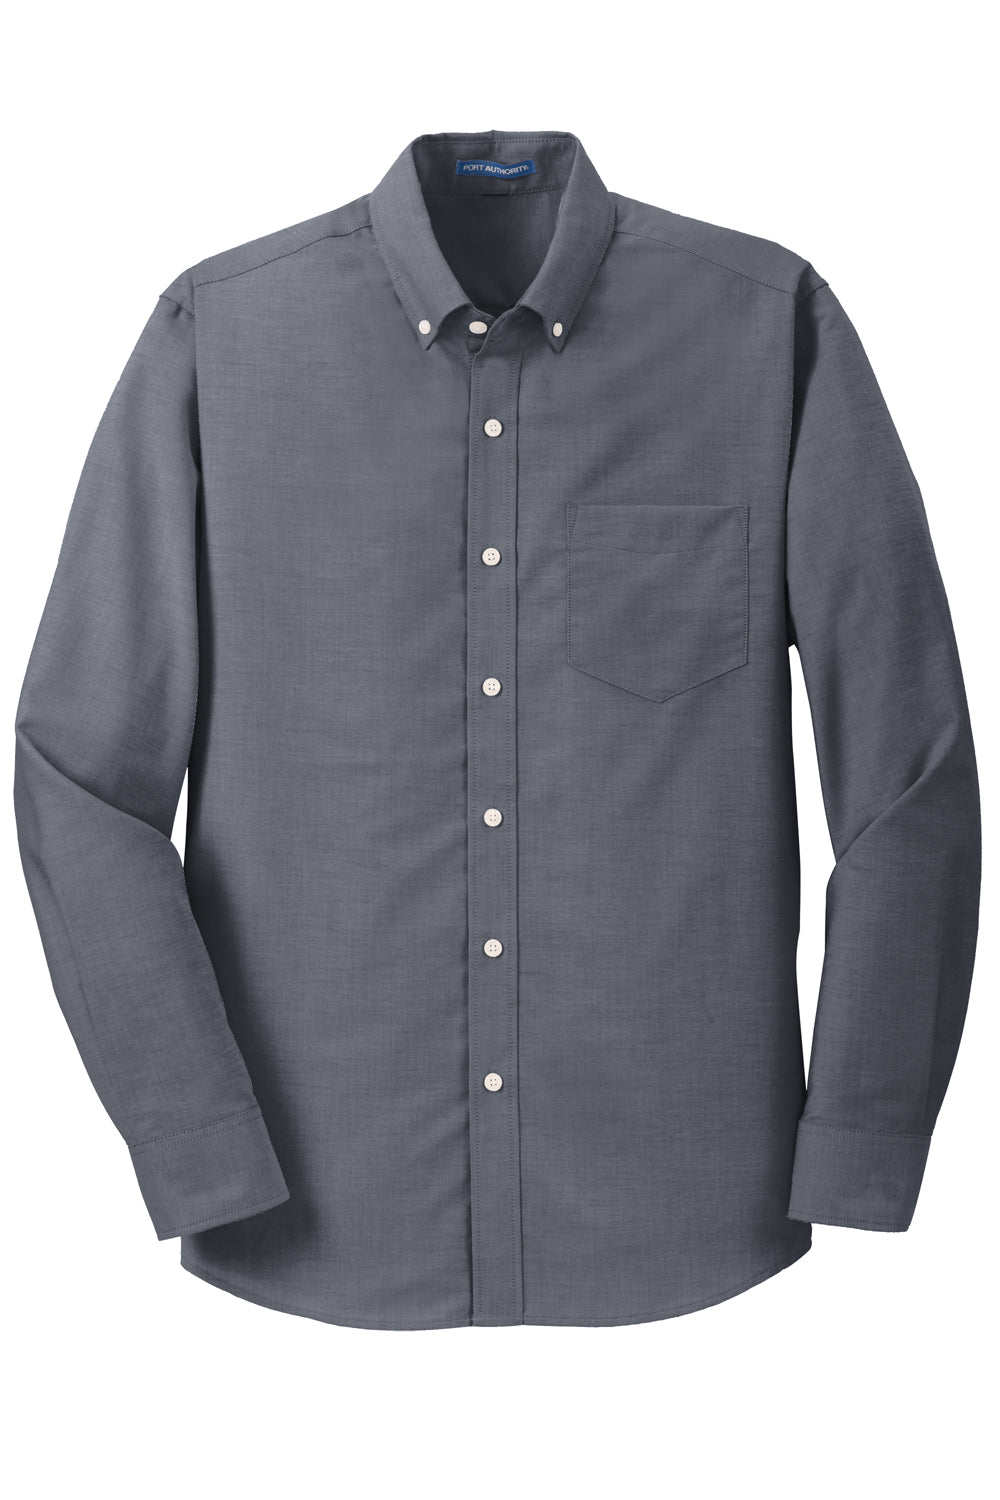 Port Authority S658/TS658 SuperPro Oxford Wrinkle Resistant Long Sleeve Button Down Shirt w/ Pocket Black Flat Front